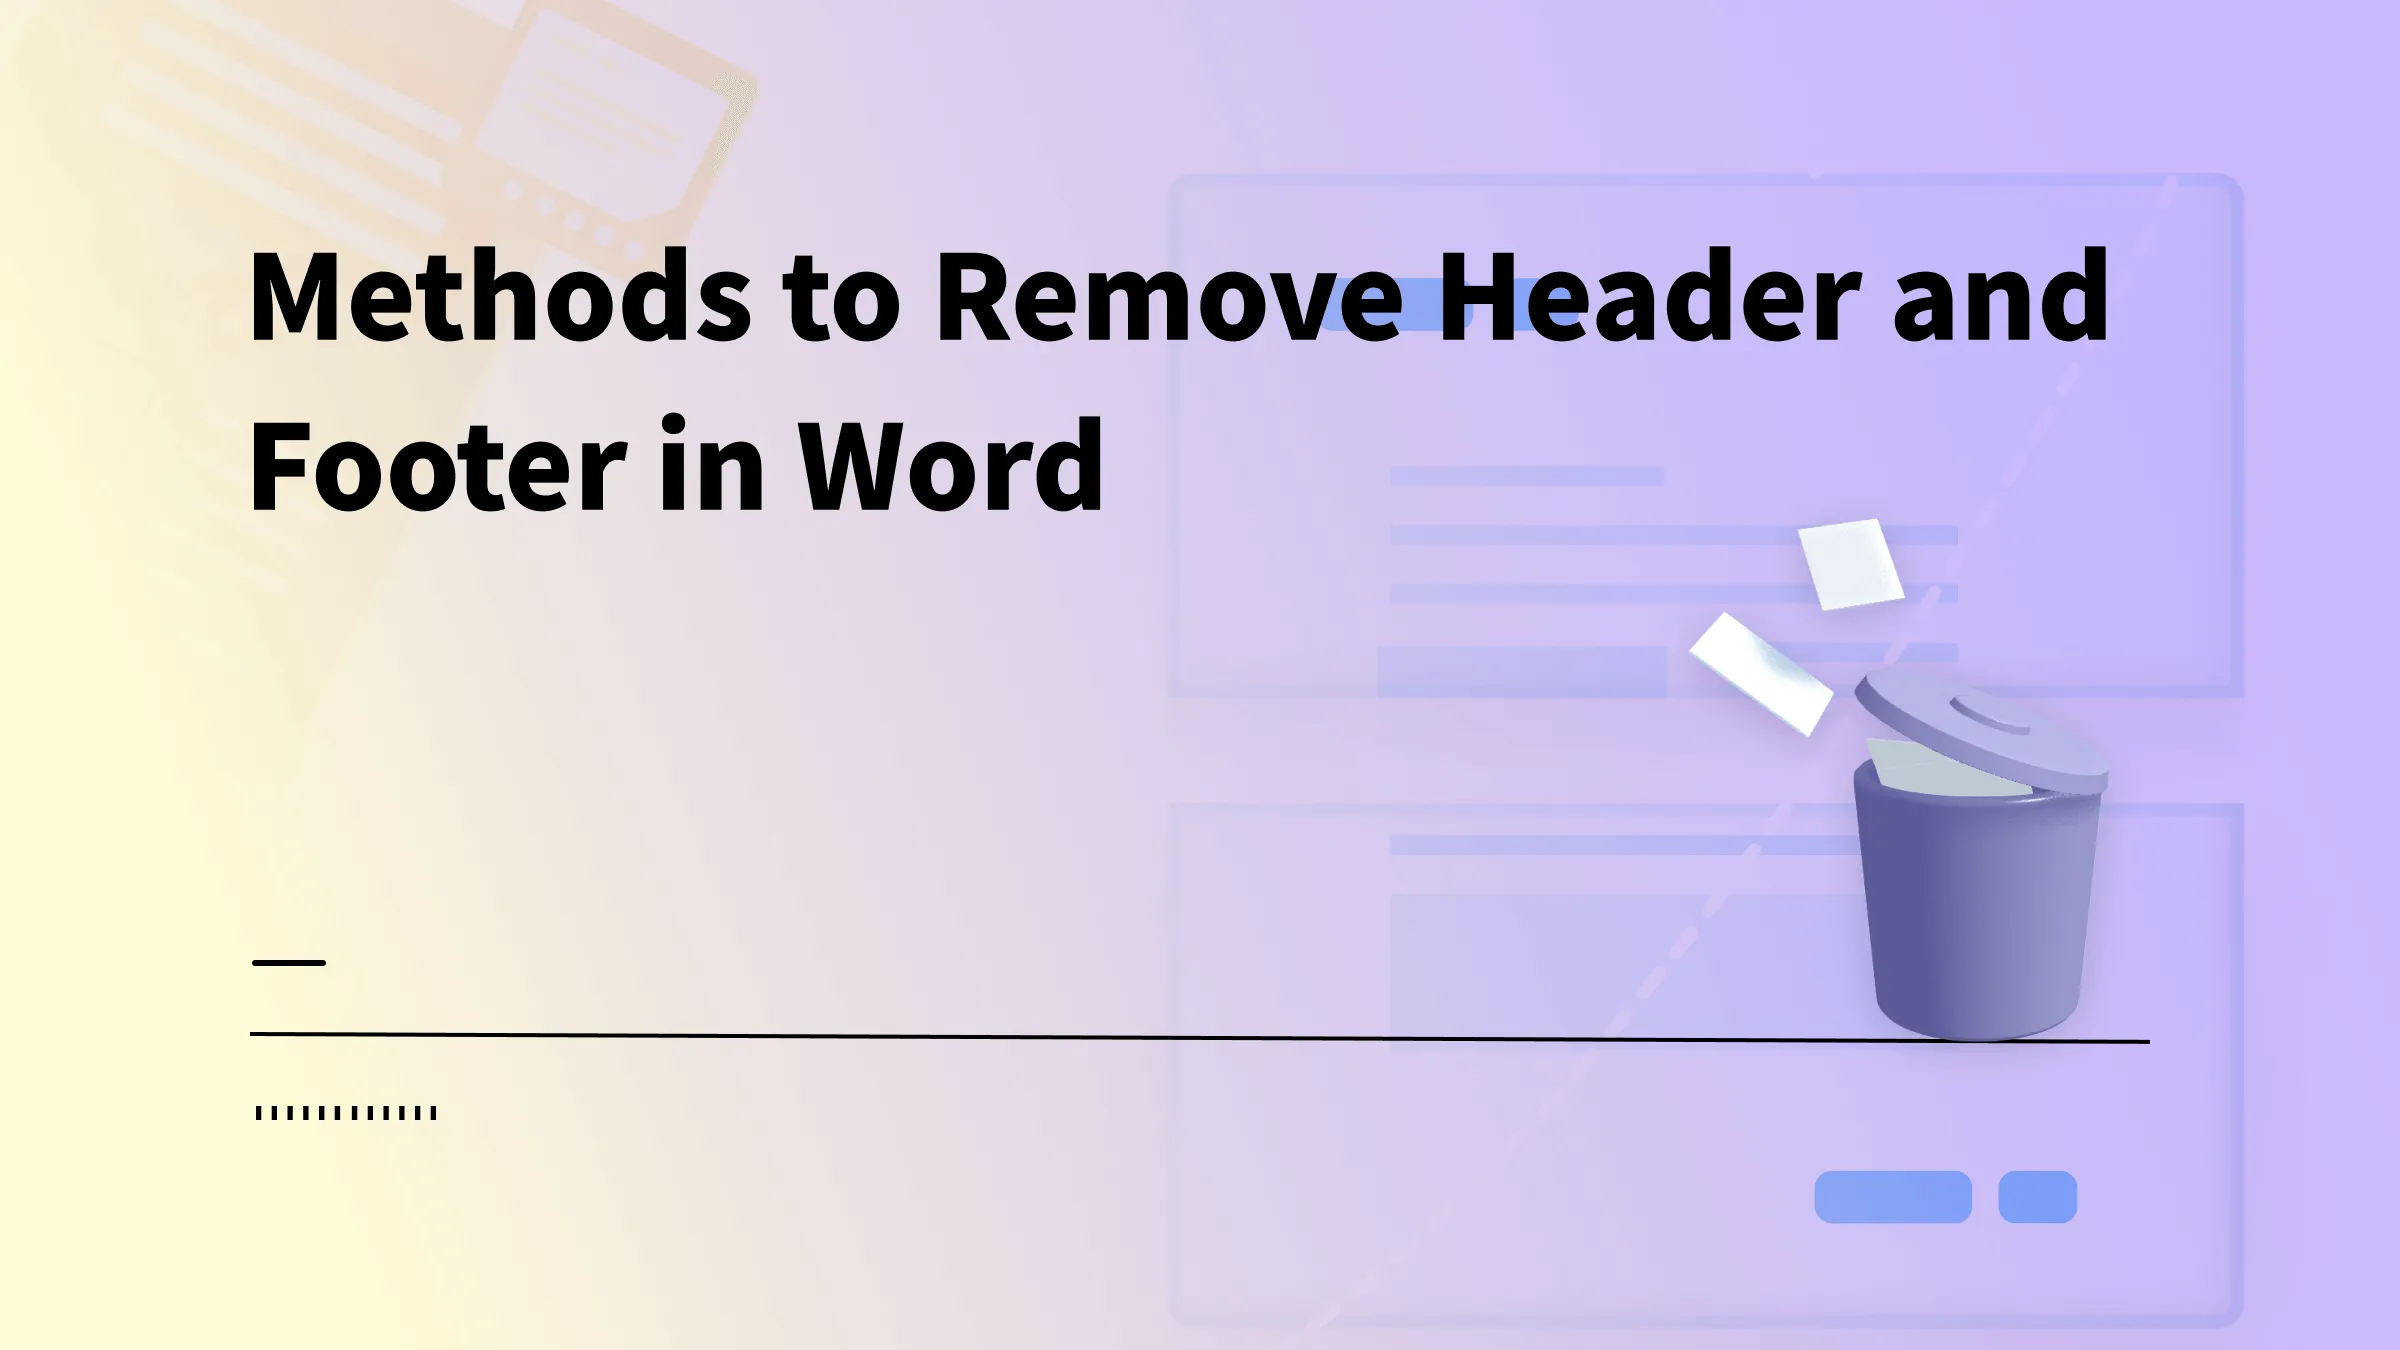 3 Methods to Remove Header and Footer in Word